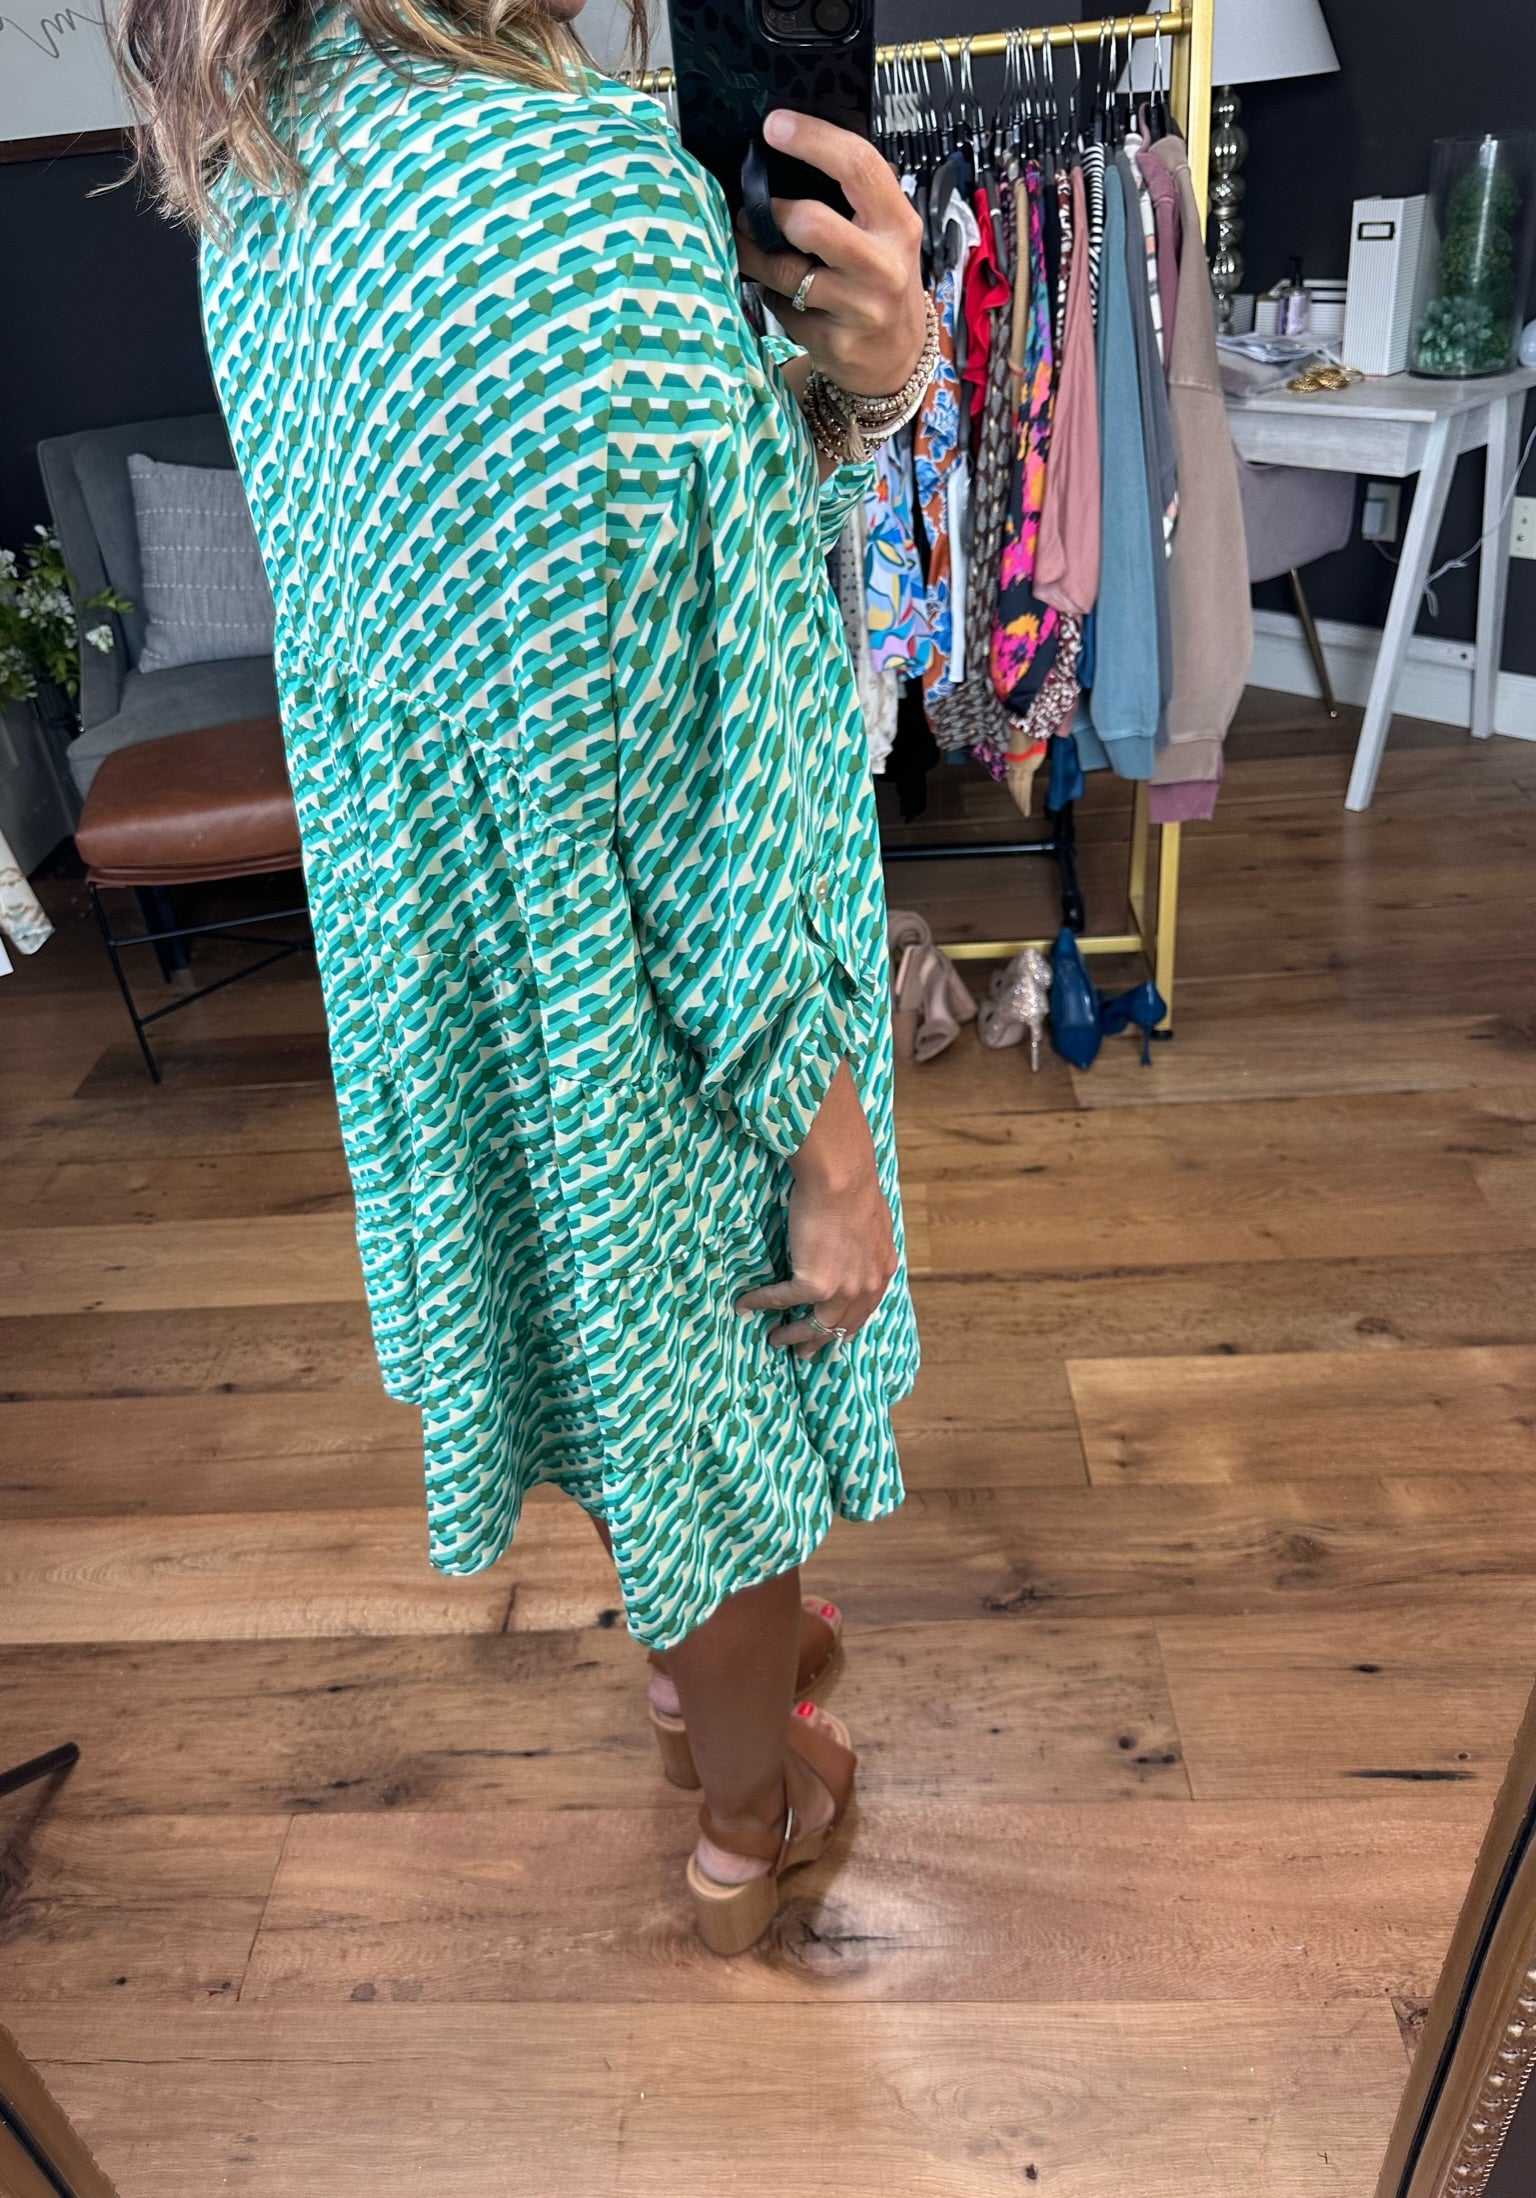 Find Your Fancy Patterned Button Detail Dress - Green